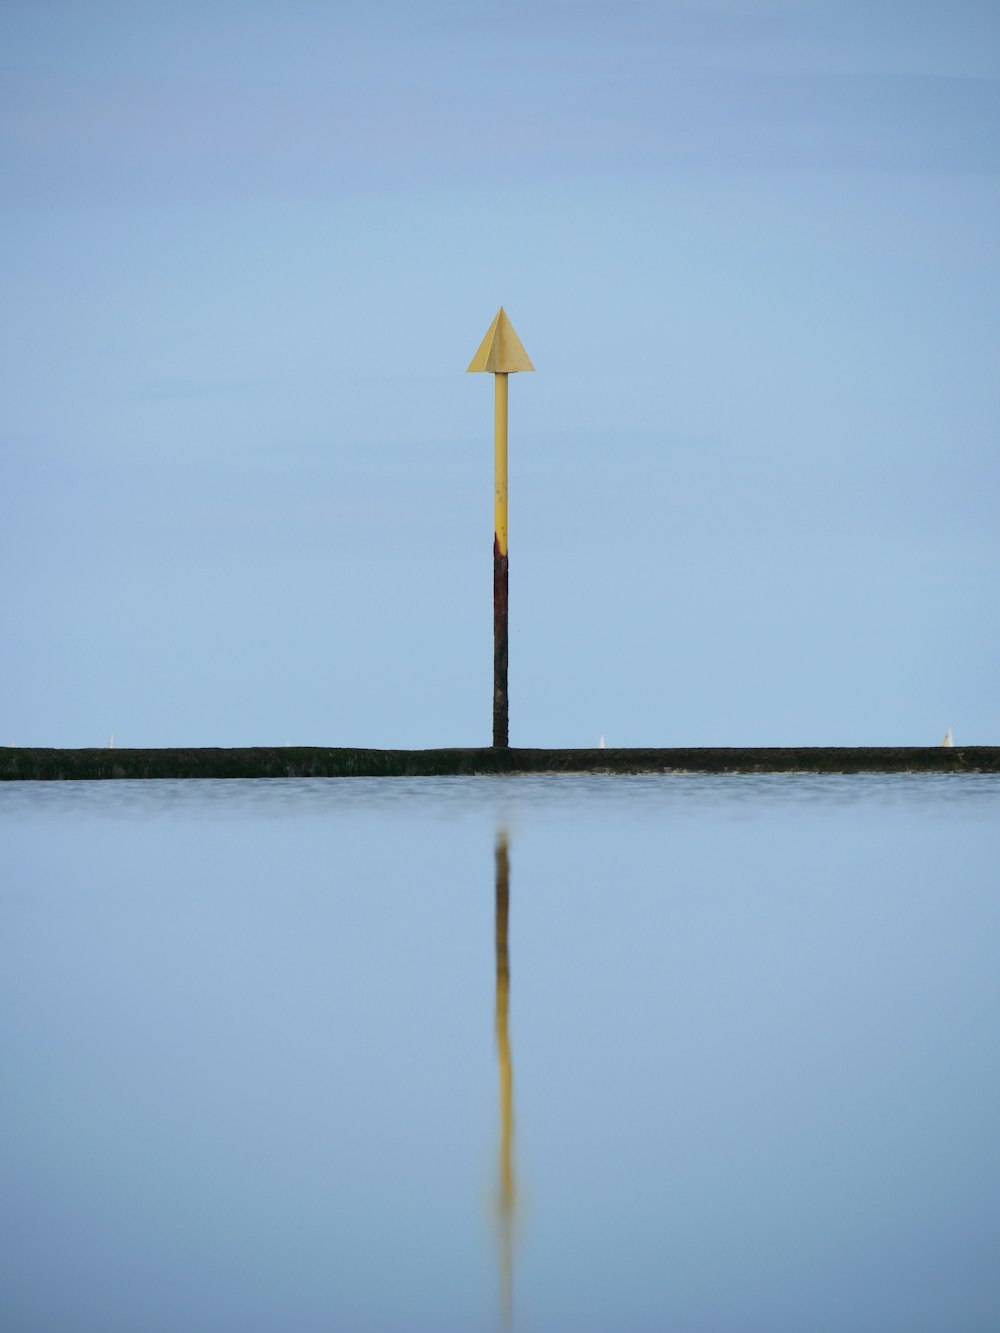 a pole in the middle of a body of water